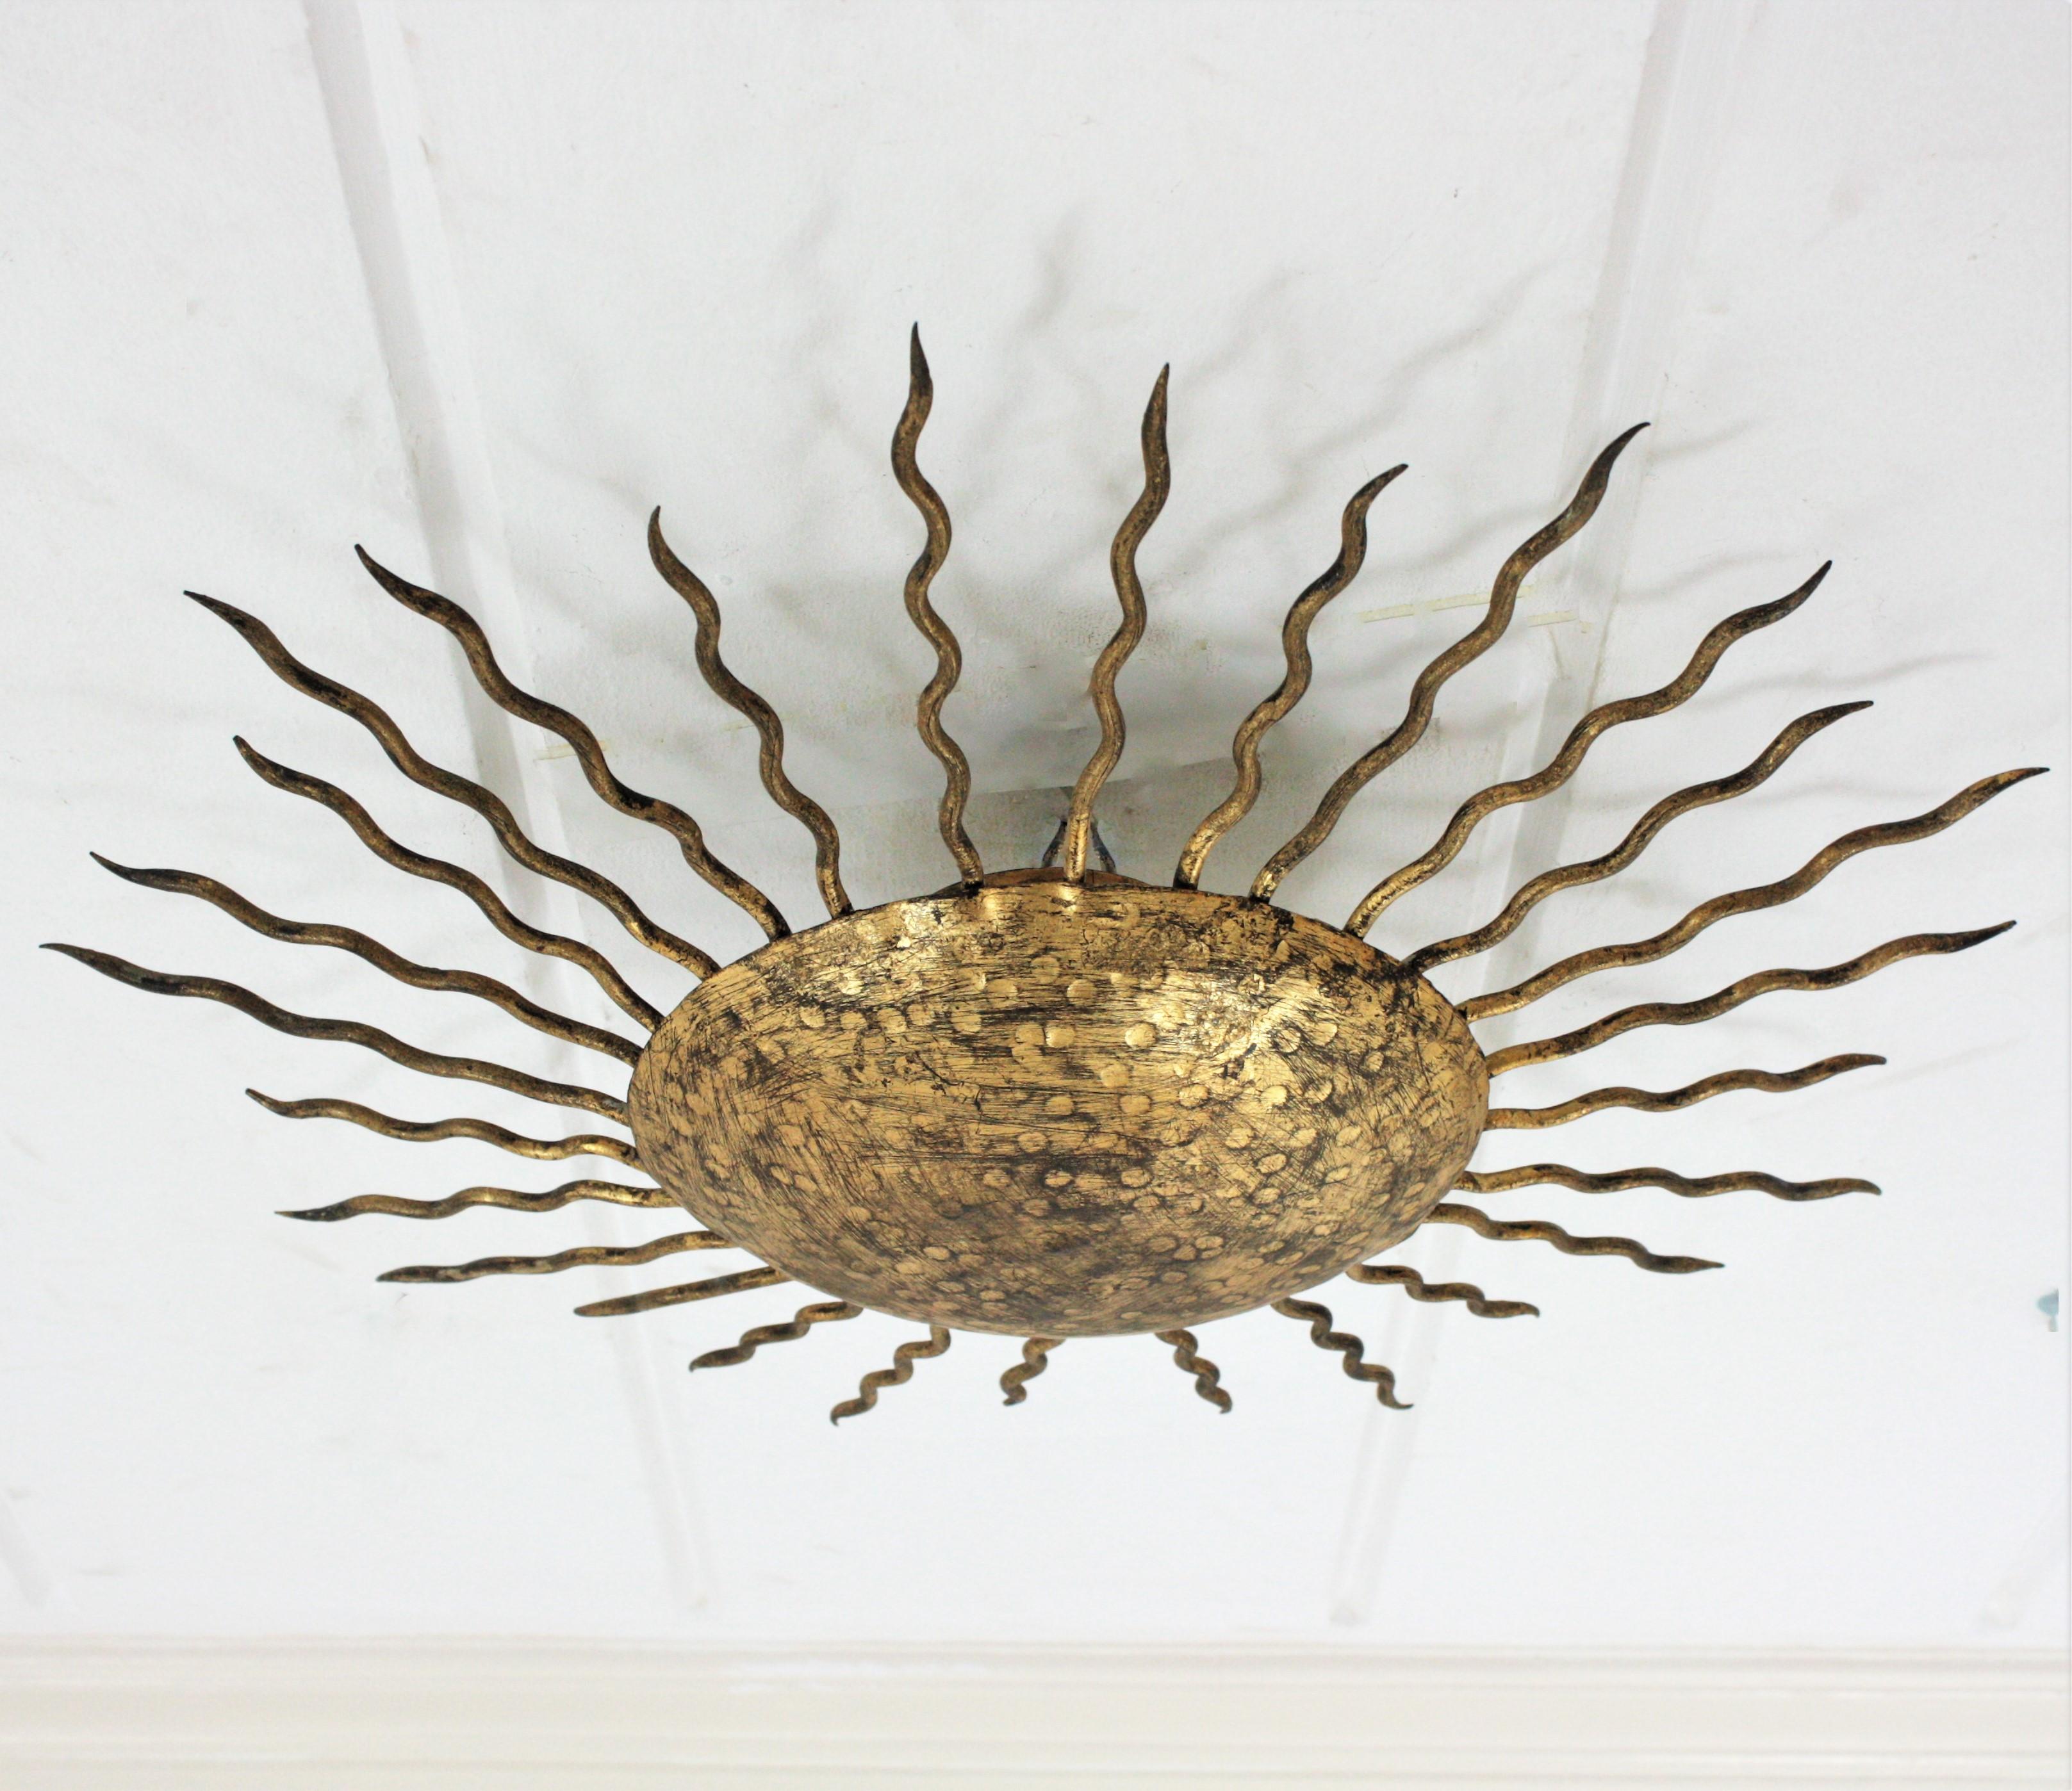 Large Sunburst Ceiling Light Fixture in Hand Hammered Gilt Iron, 1950s For Sale 7